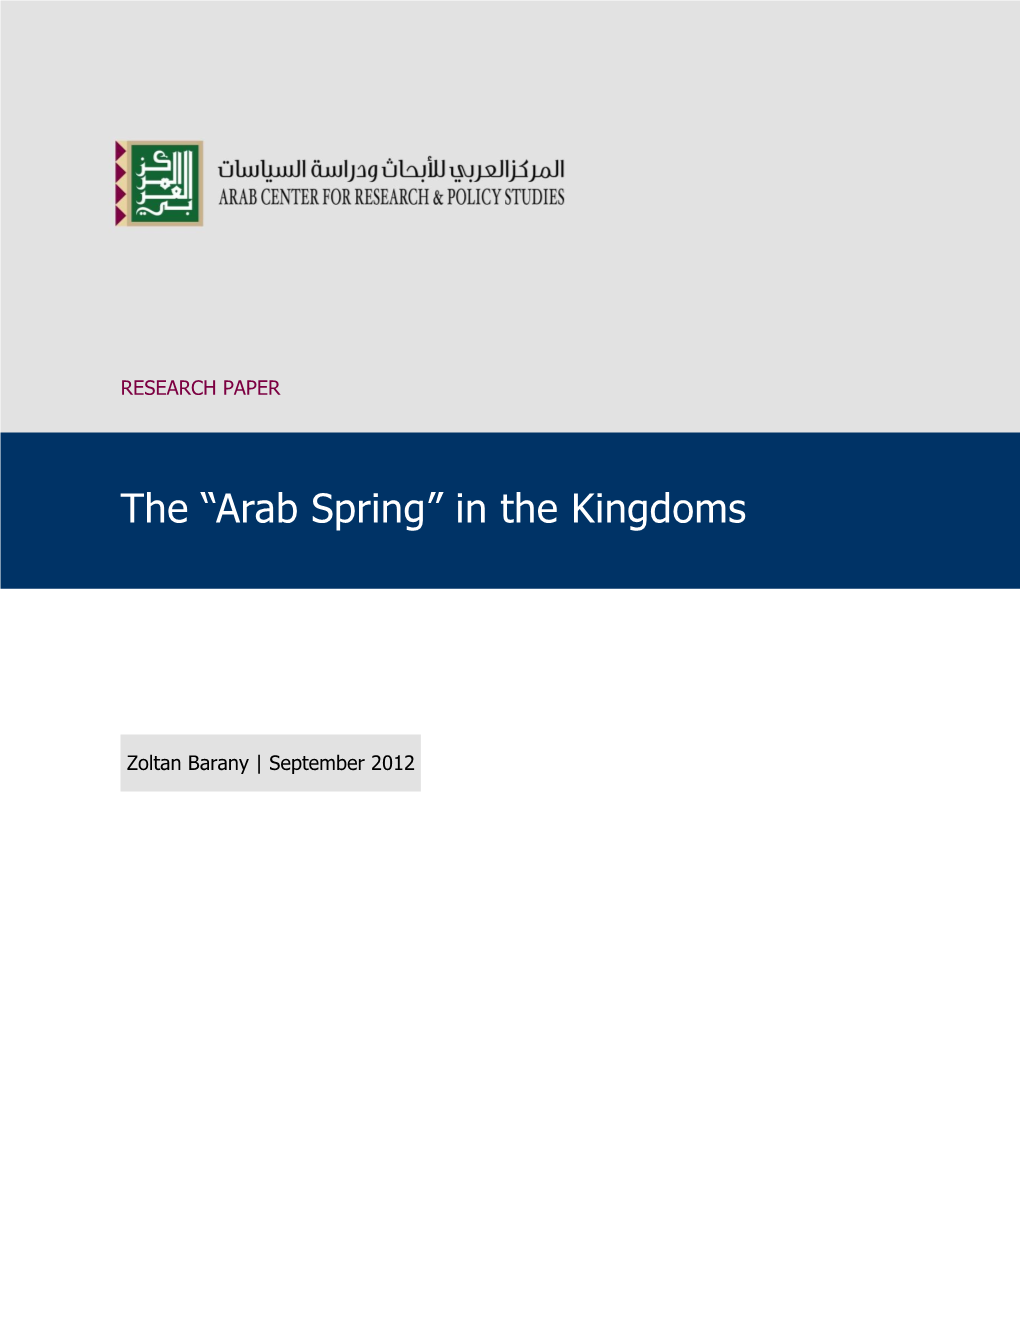 The “Arab Spring” in the Kingdoms